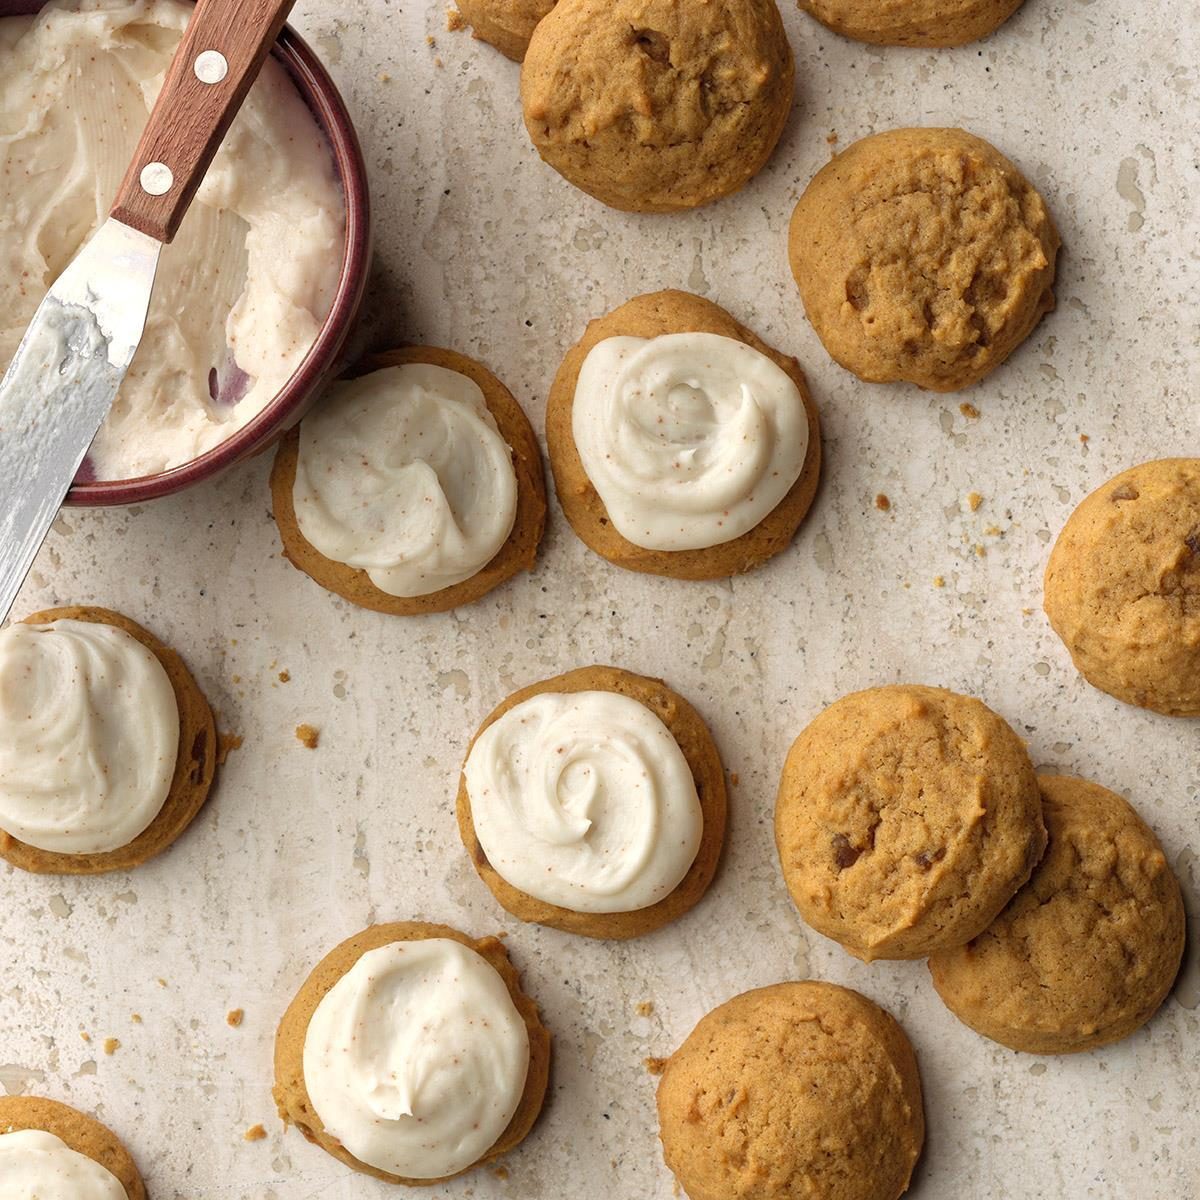 Pumpkin Cookies With Browned Butter Frosting Exps Pcbz19 134480 C04 26 1b 2